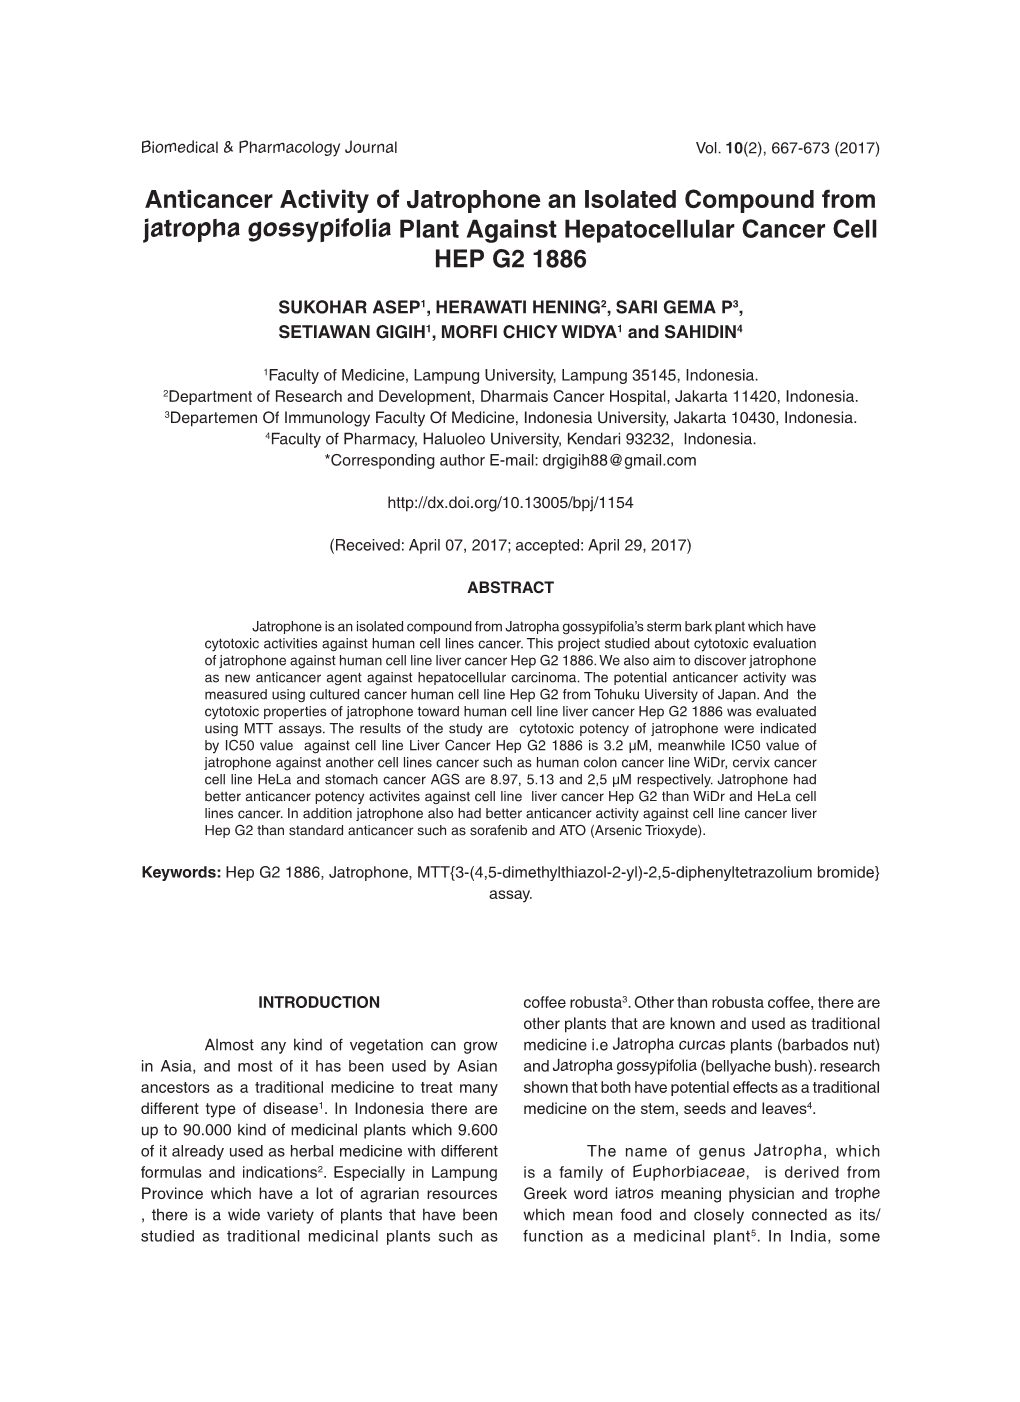 Anticancer Activity of Jatrophone an Isolated Compound from Jatropha Gossypifolia Plant Against Hepatocellular Cancer Cell HEP G2 1886